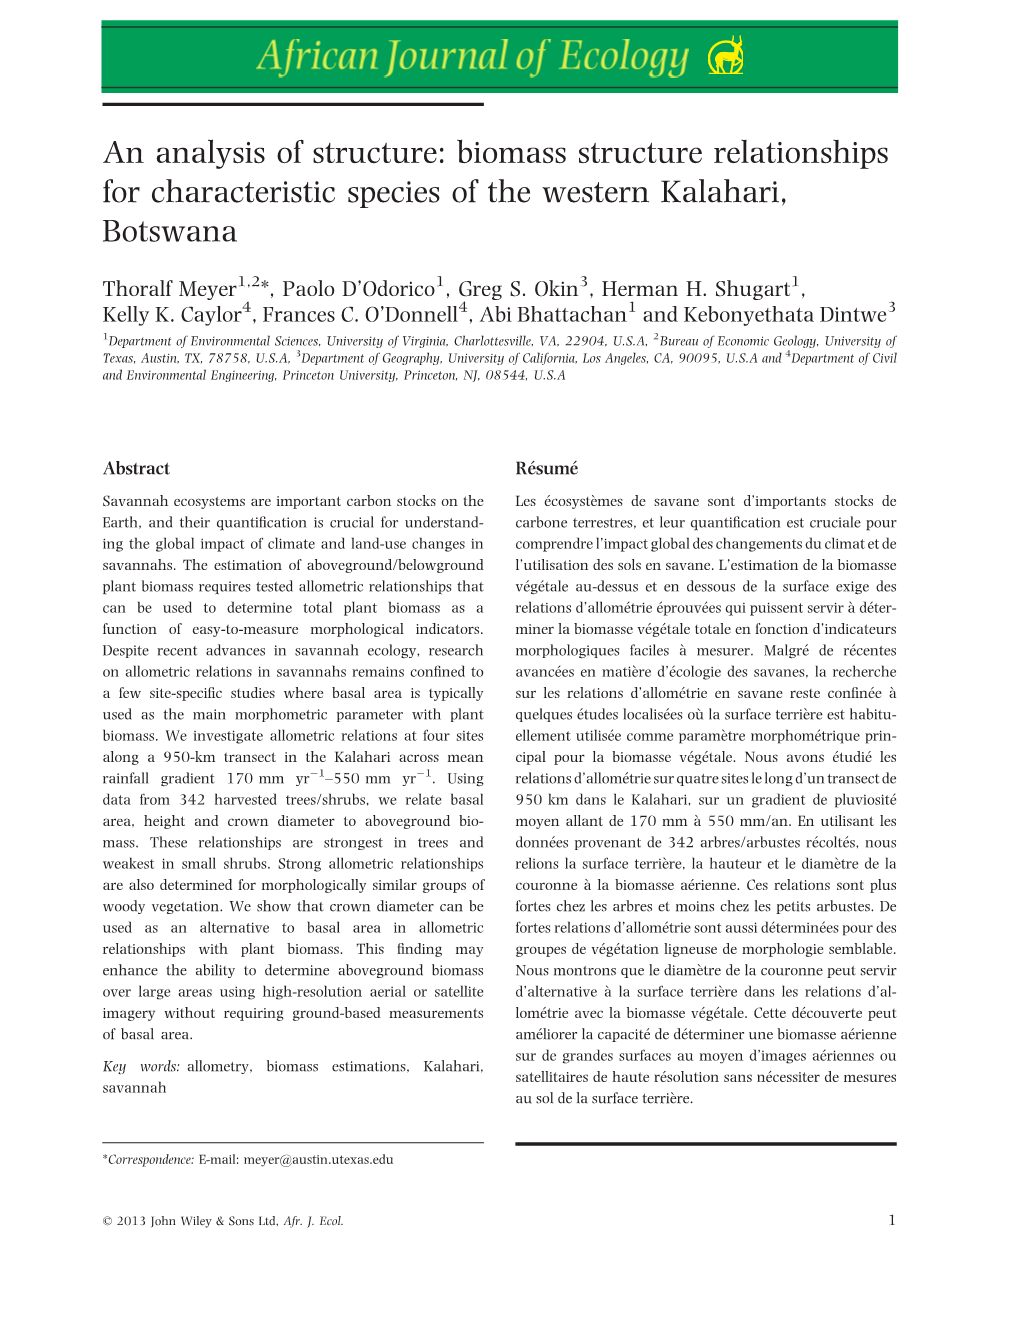 Biomass Structure Relationships for Characteristic Species of the Western Kalahari, Botswana